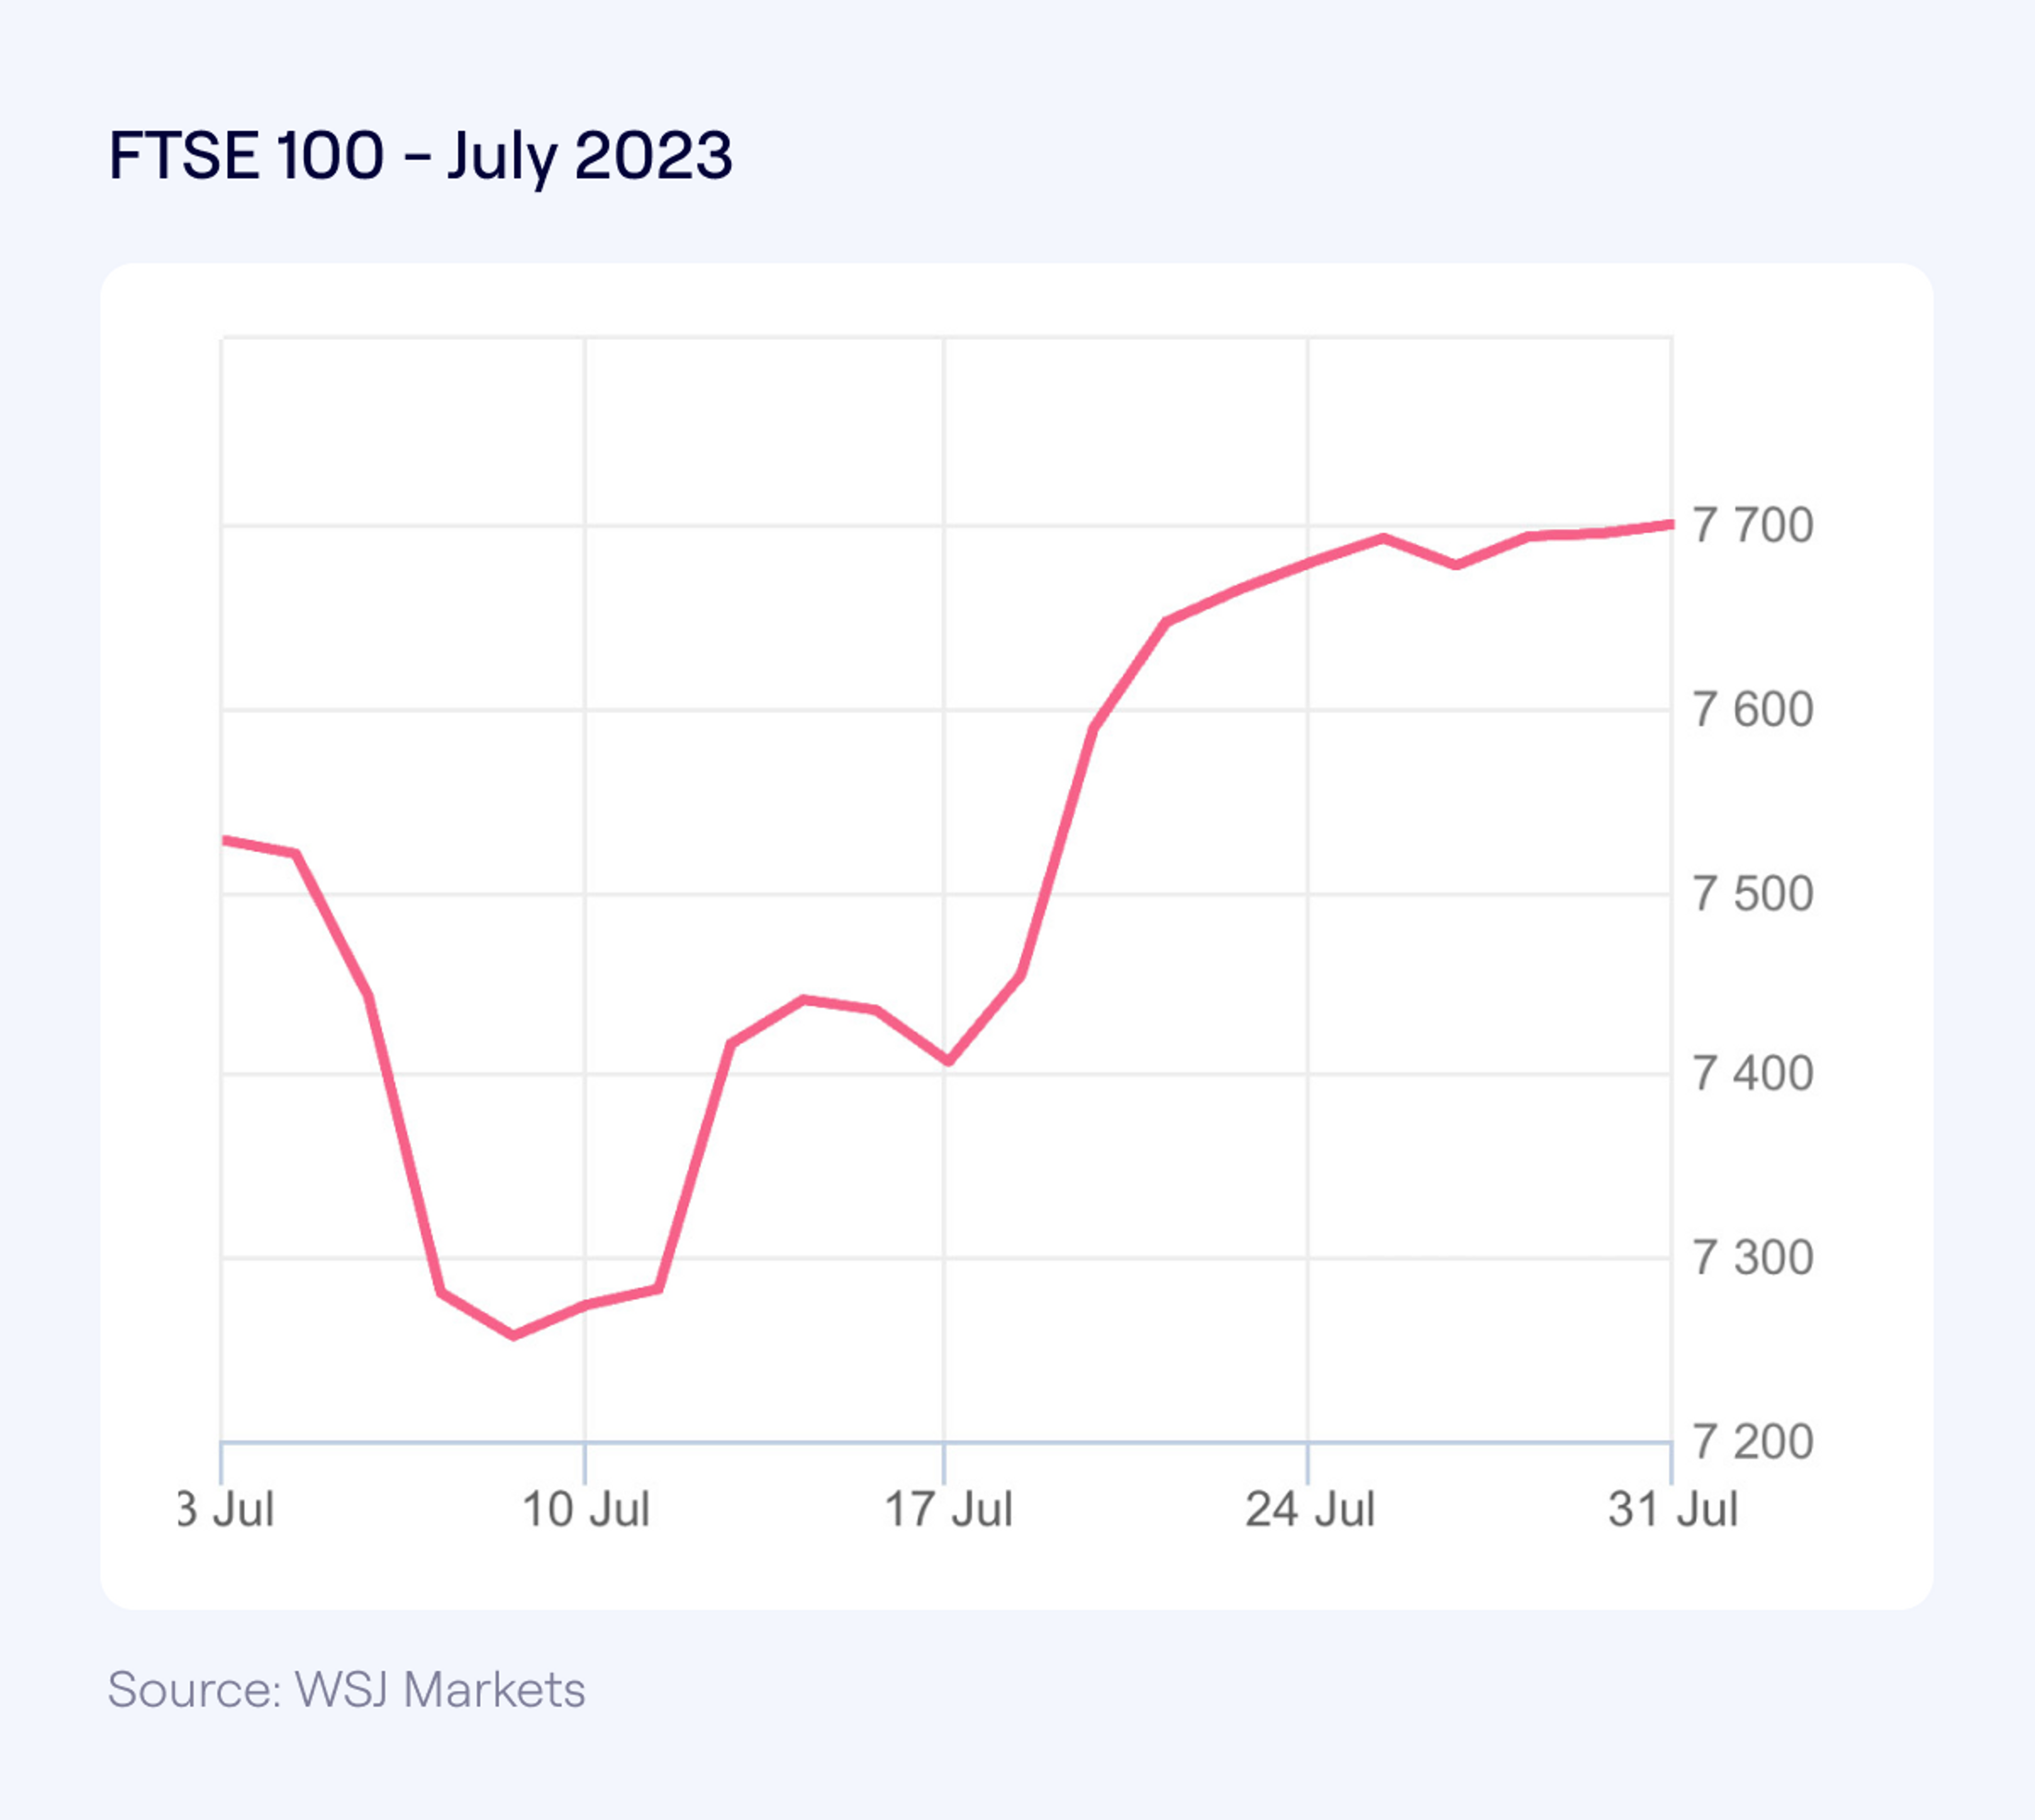 Line chart showing FTSE 100 performance for 20 years to July 2023